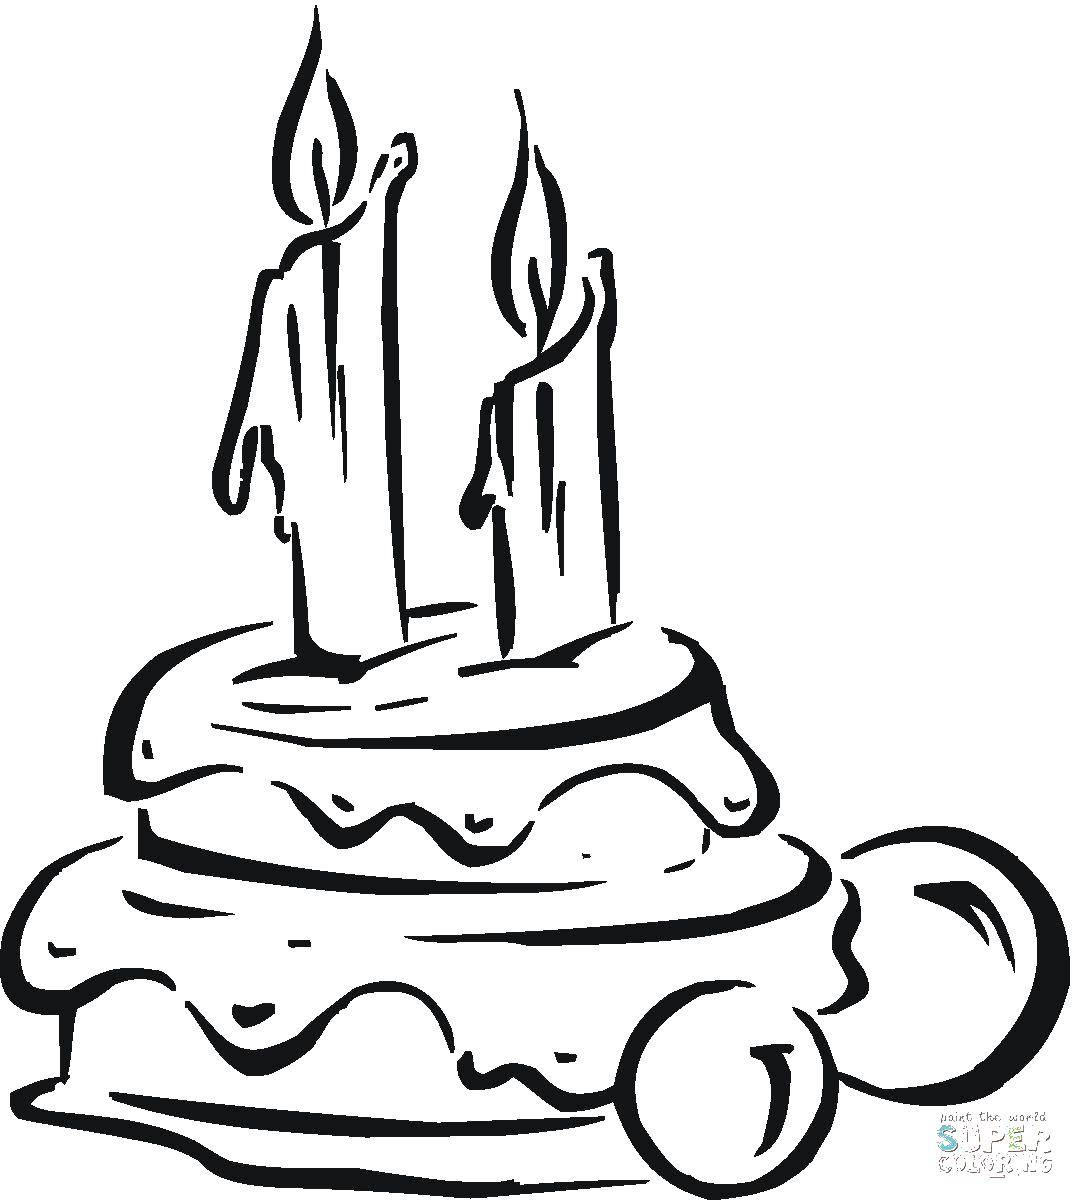 Coloring Cake with two candles. Category cakes. Tags:  2 years, cake.